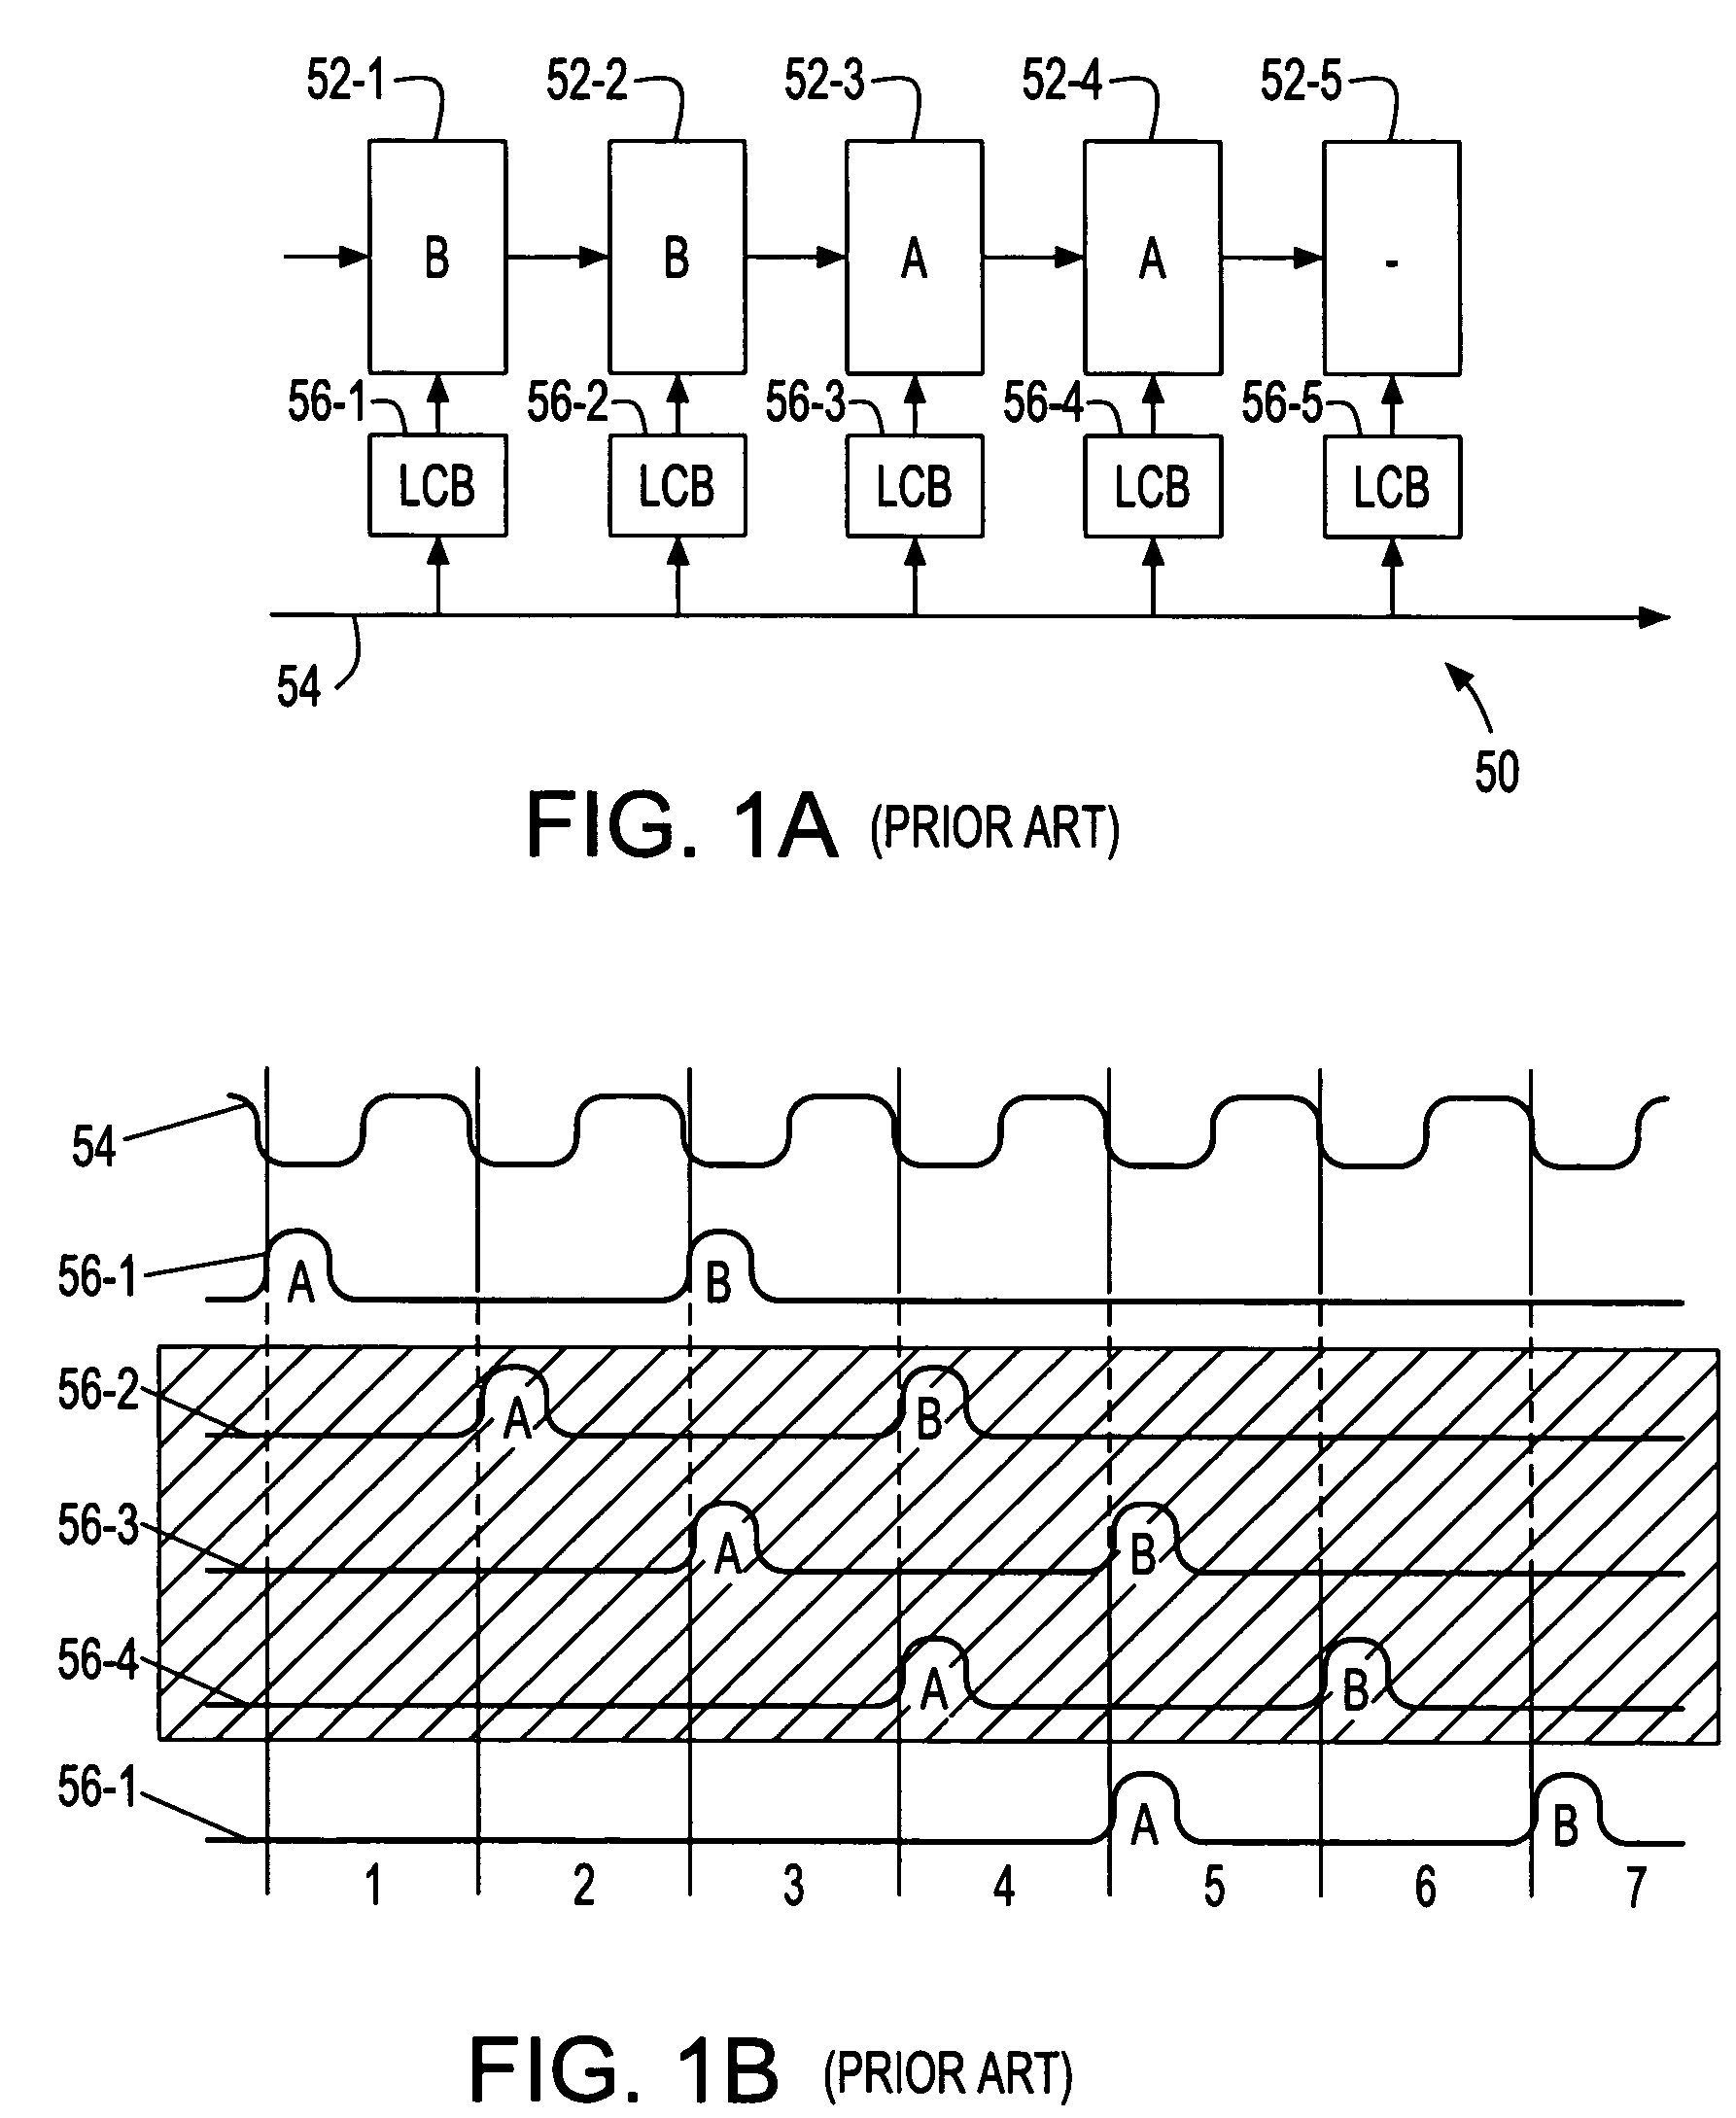 Synchronous pipeline with normally transparent pipeline stages